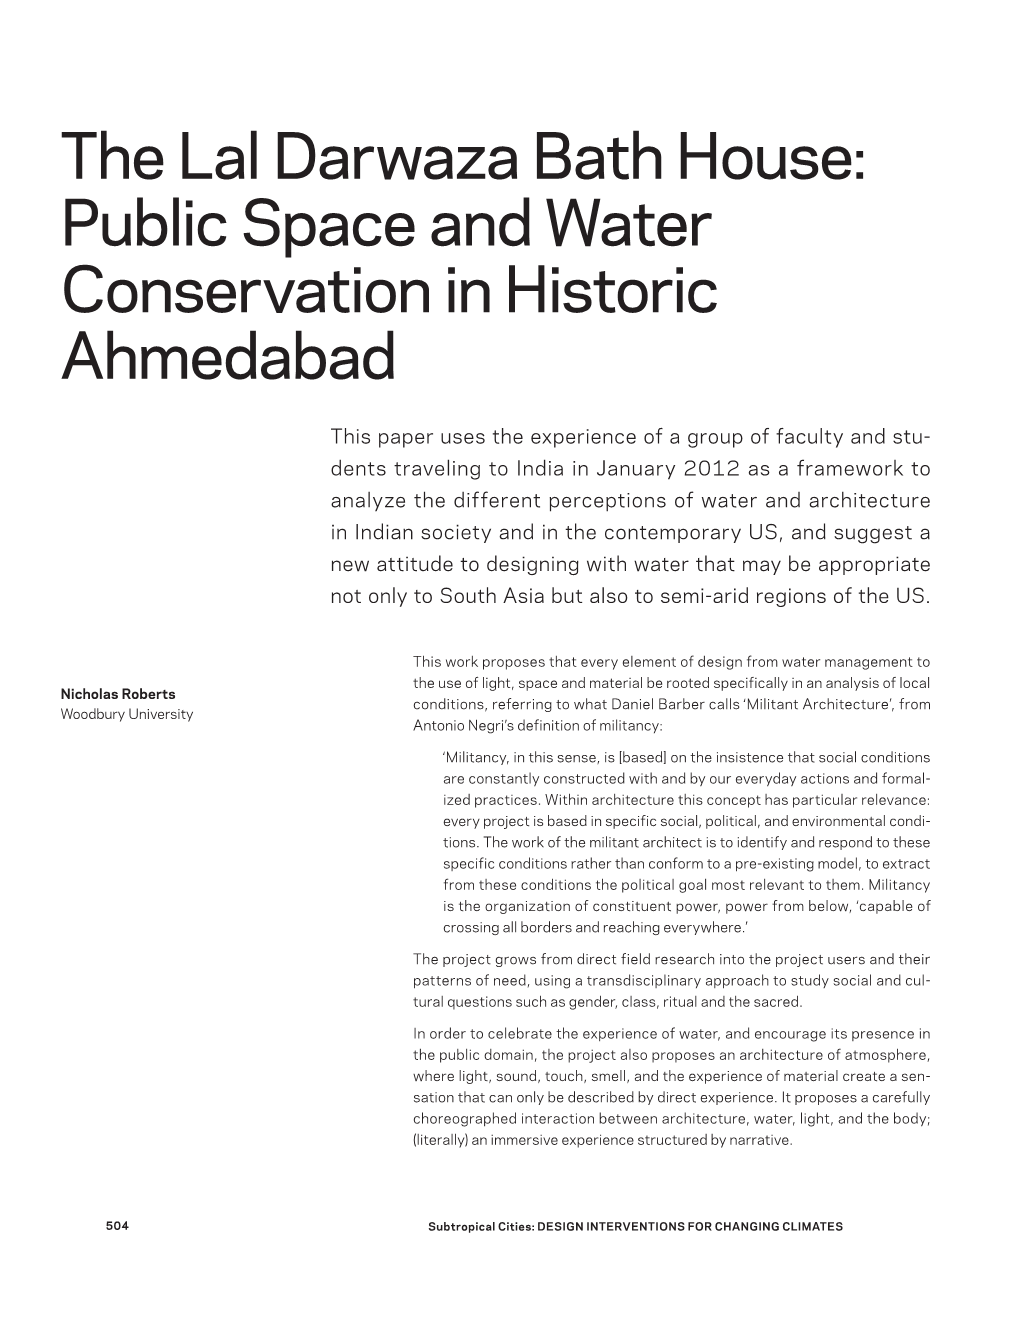 The Lal Darwaza Bath House: Public Space and Water Conservation in Historic Ahmedabad